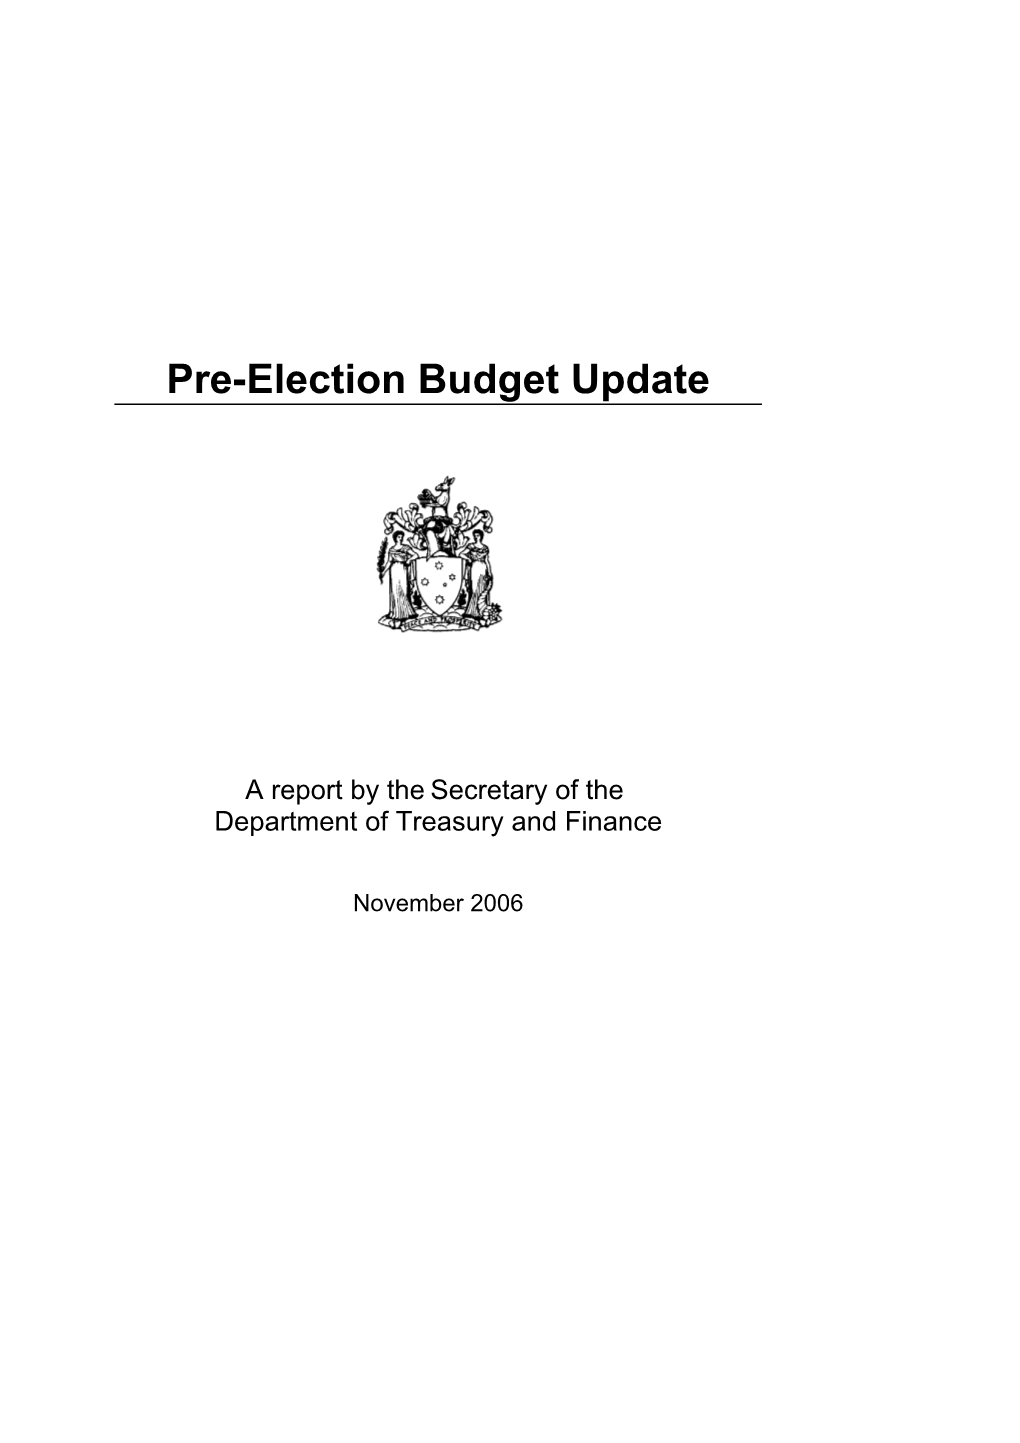 Chapter 1: Budget Position and Outlook